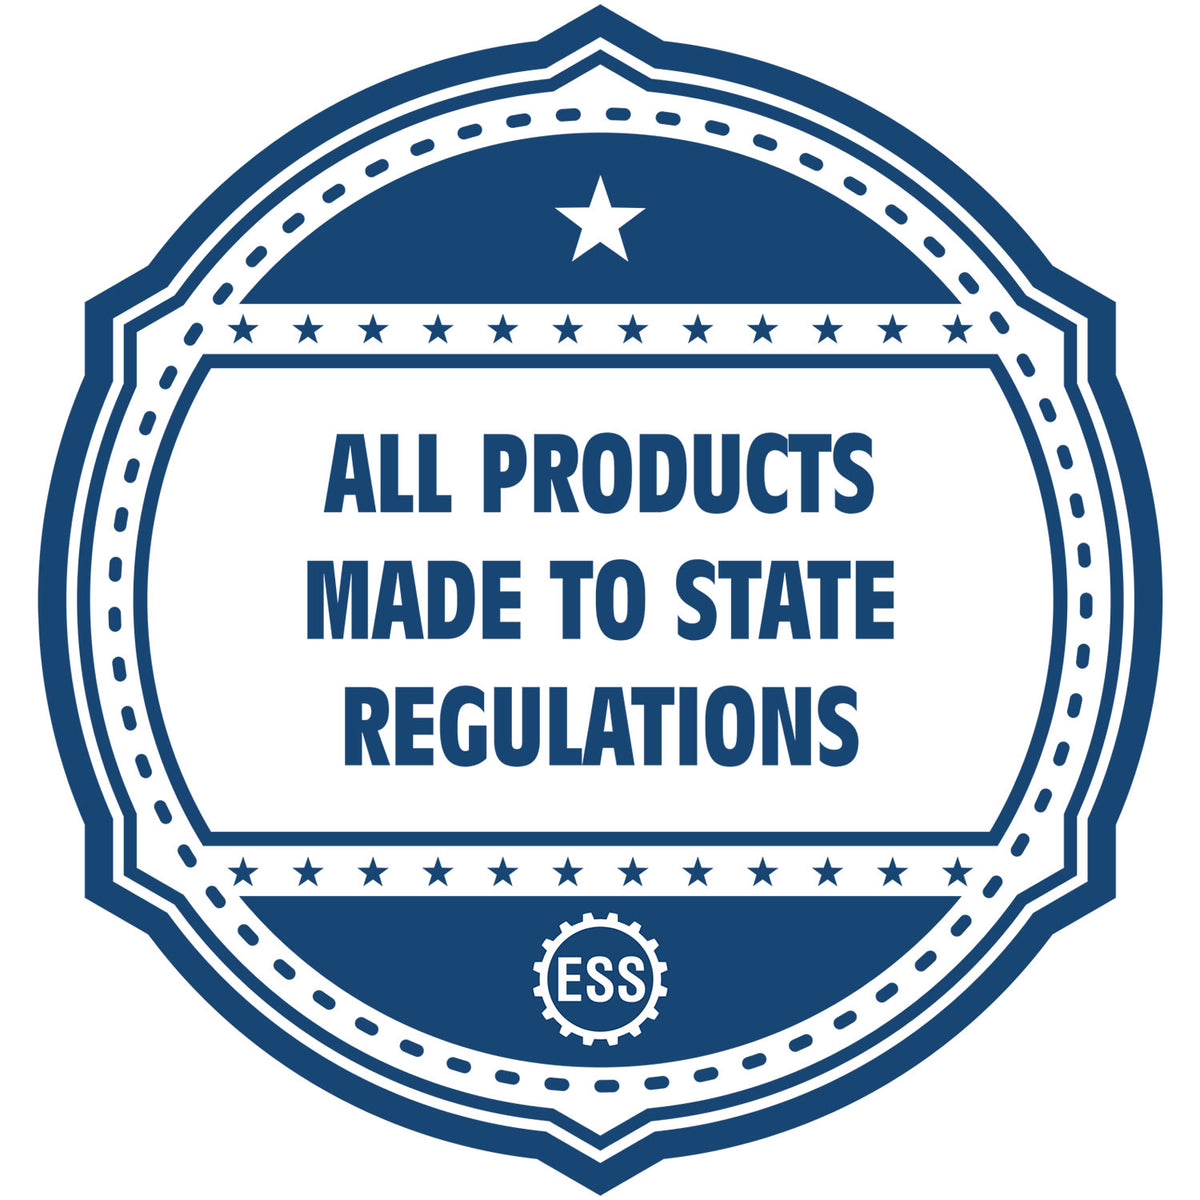 An icon or badge element for the Slim Pre-Inked Maryland Professional Engineer Seal Stamp showing that this product is made in compliance with state regulations.